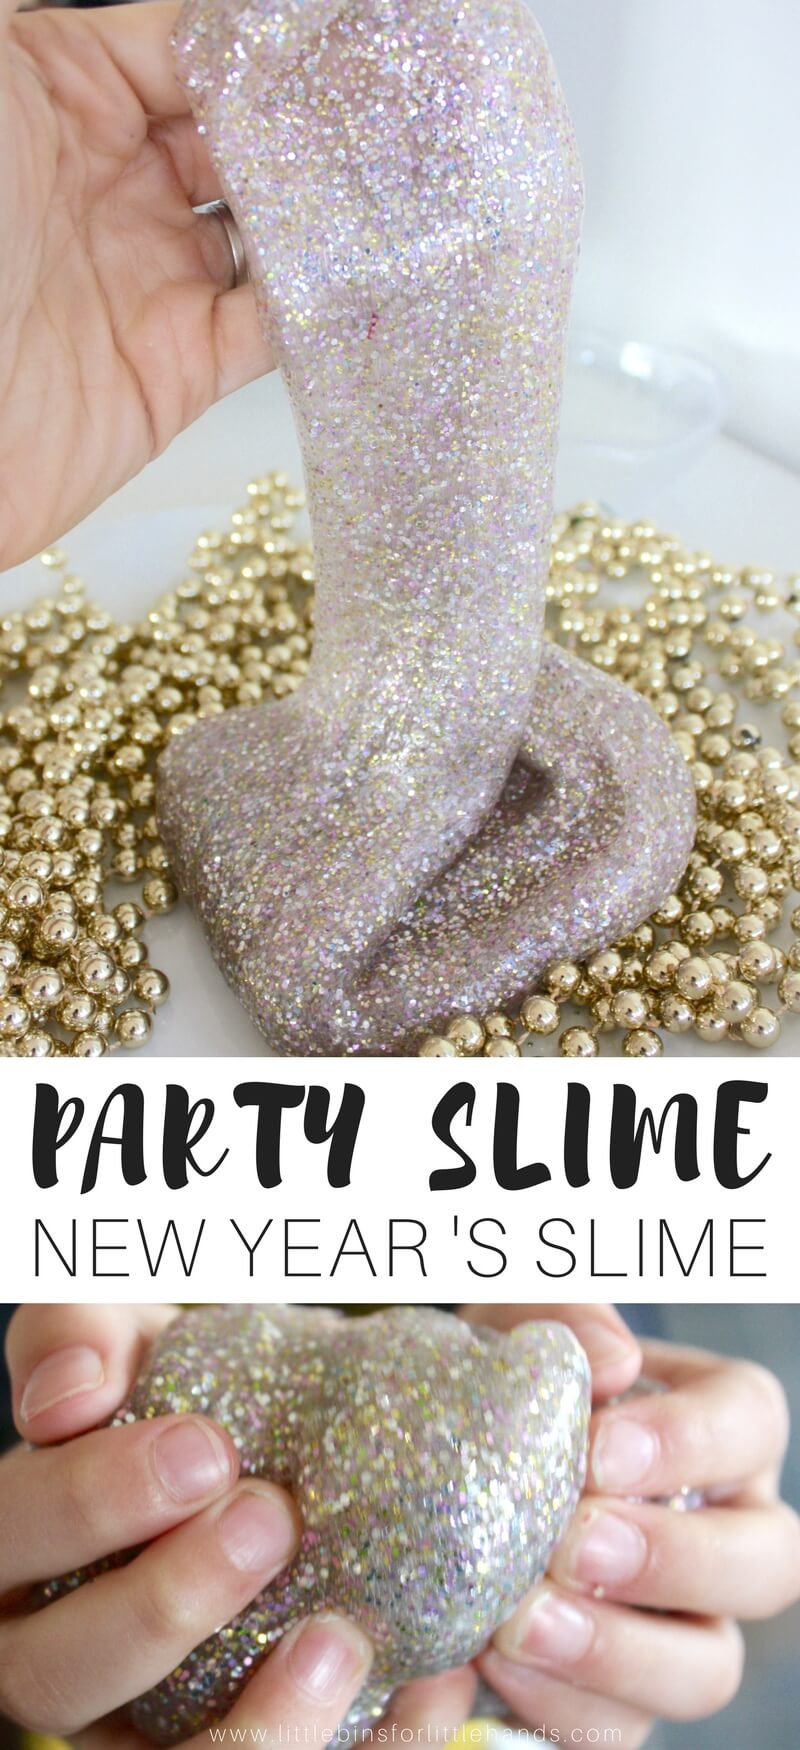 Make the best homemade slime for New Years! Our party slime is the perfect activity for a New Year's Eve kids party or New Years Day fun! We love making slime with any of our 4 basic slime recipes. Sparkling glitter slime is perfect for any occasion.